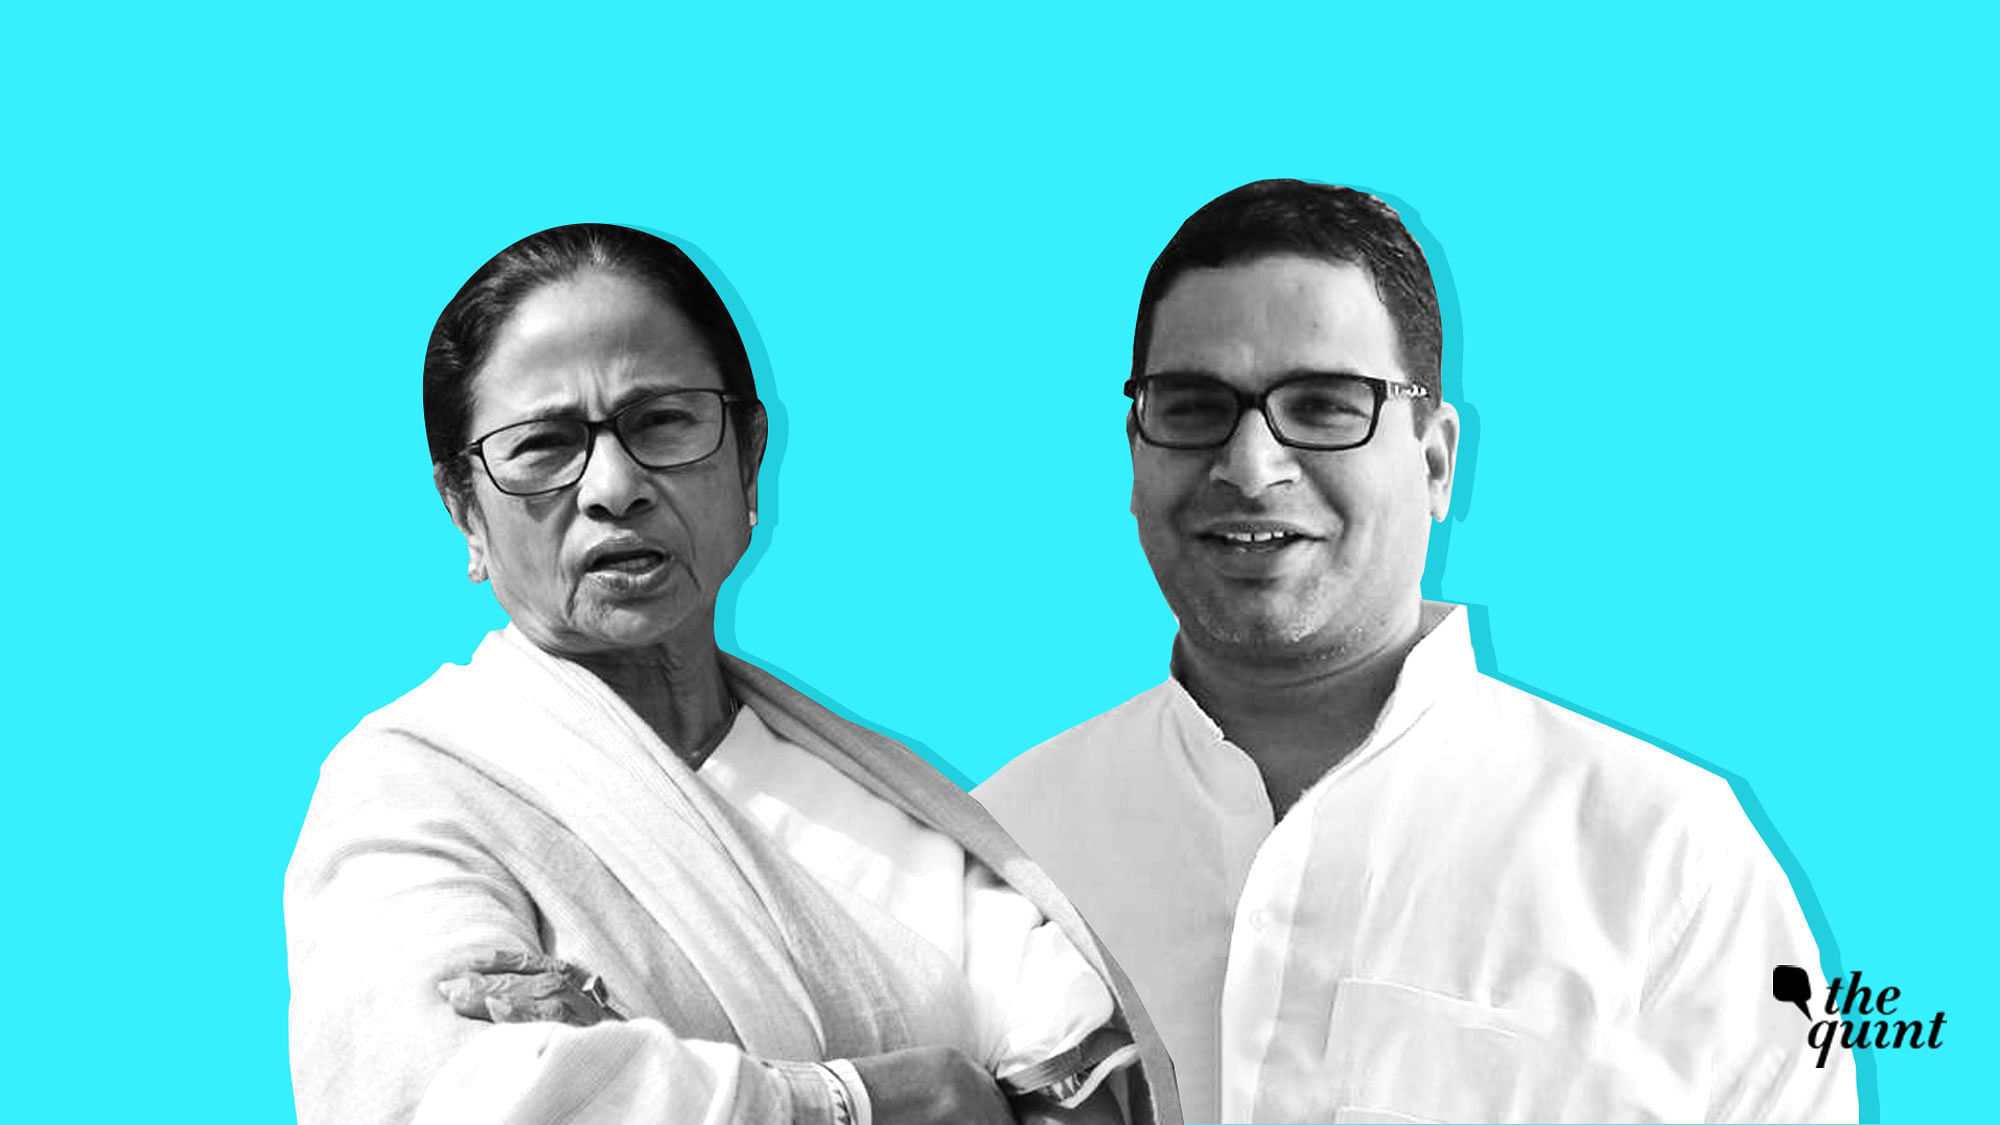 West Bengal Chief Minister and Trinamool Congress supremo Mamata Banerjee signed on election strategist Prashant Kishor after a two-hour meeting in Kolkata.